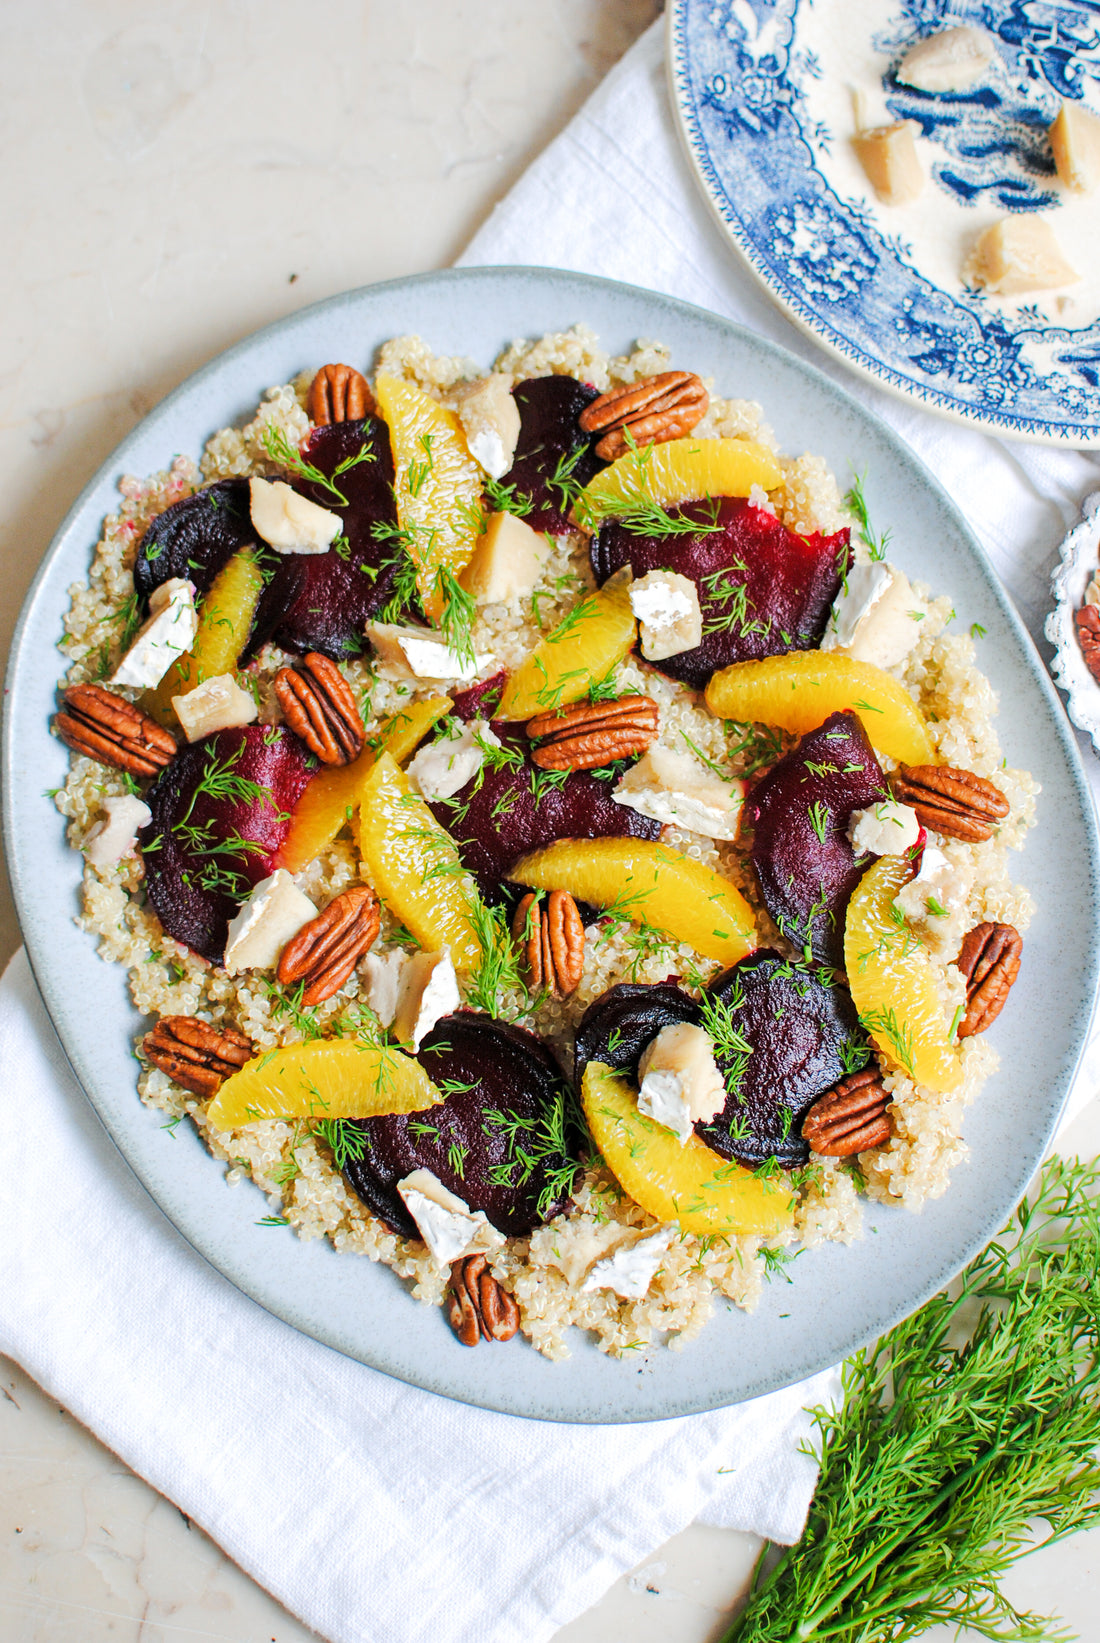 Winter salad with quinoa, orange, beetroot, pecan nuts and a brie style vegan cheese